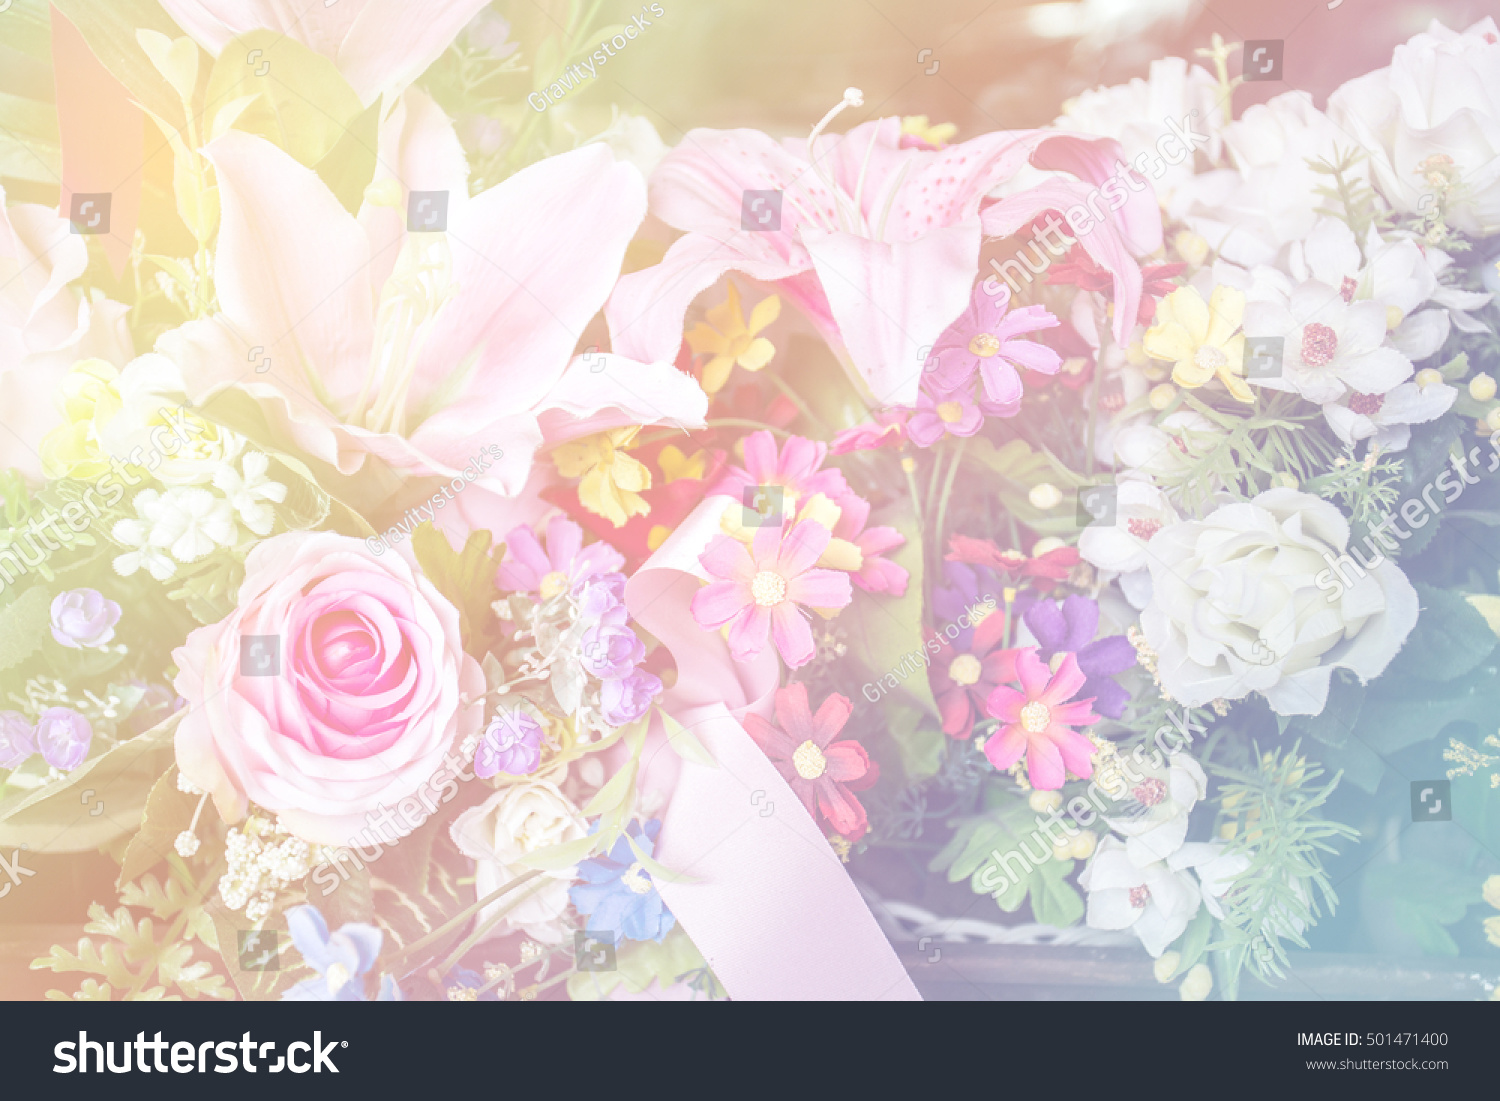 Edit Images Free Online - Flowers background | Shutterstock Editor